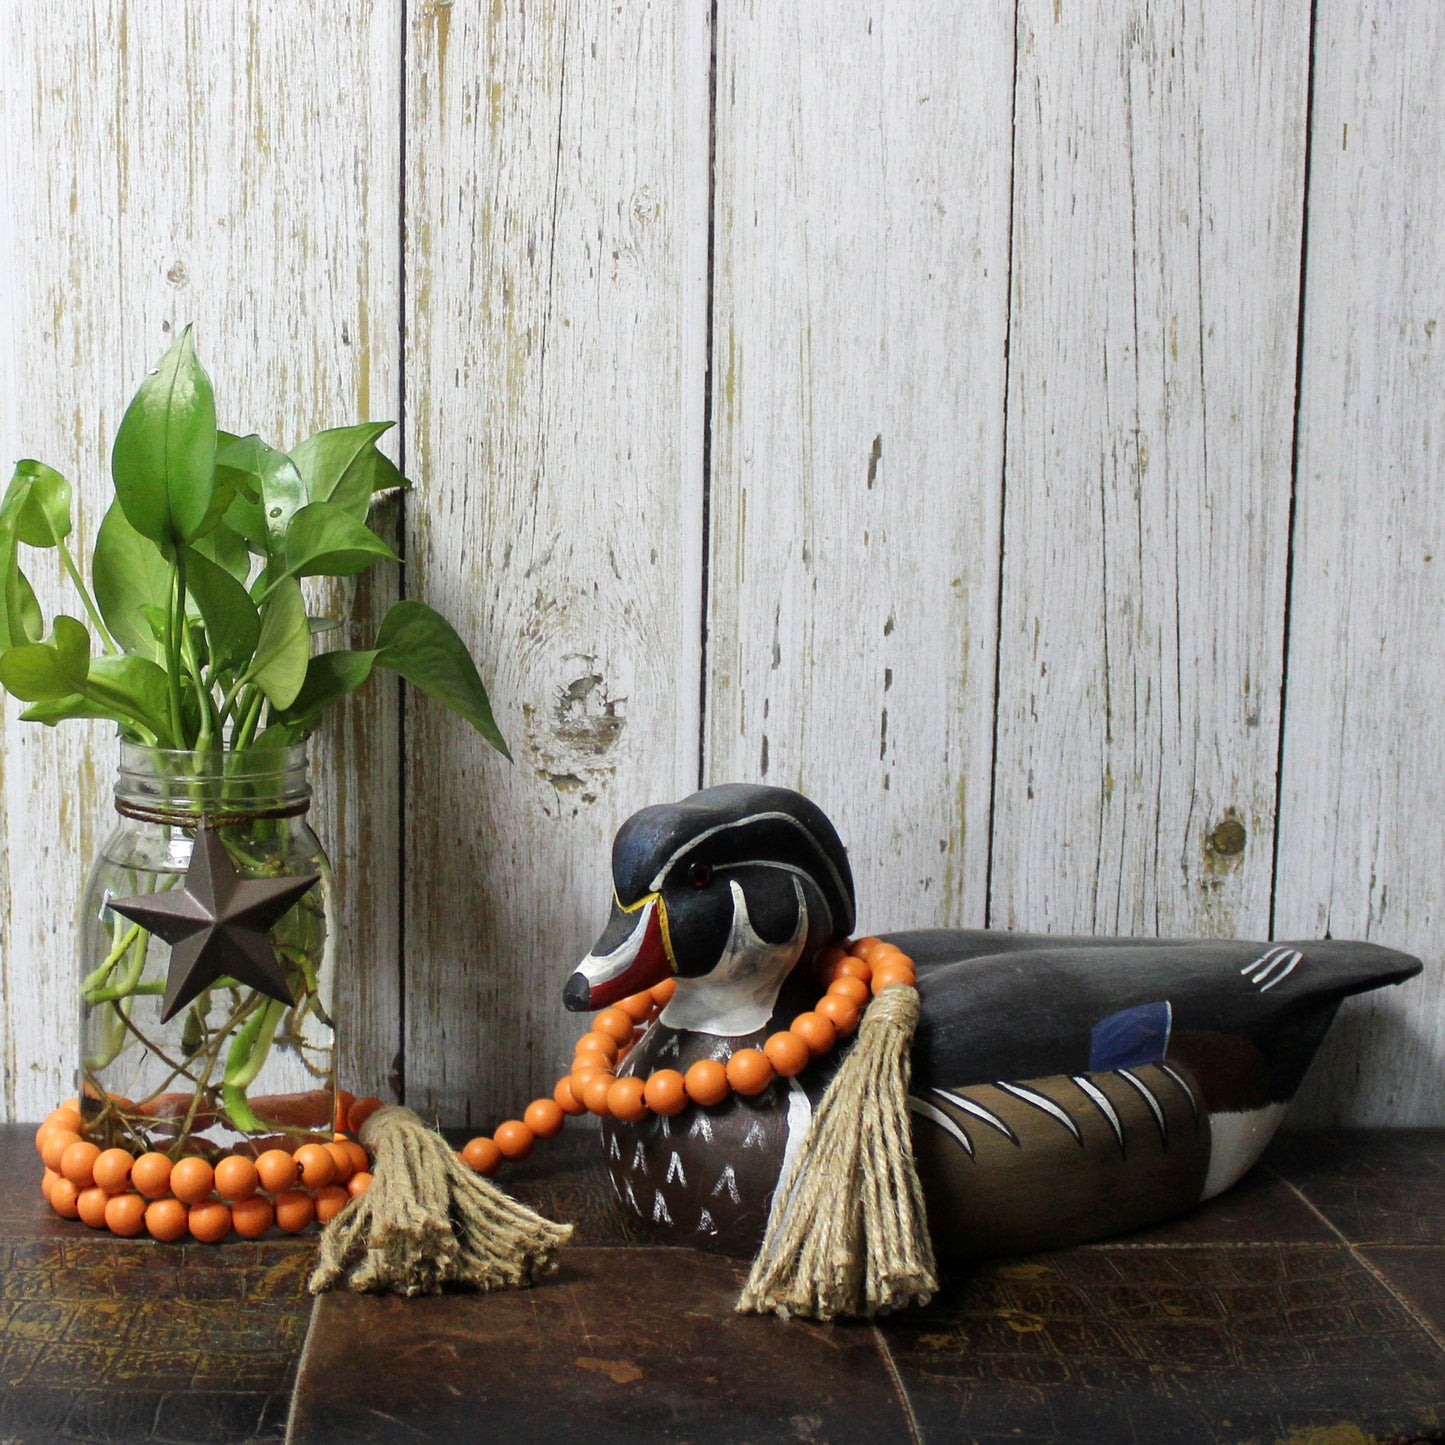 CVHOMEDECO. Wood Beads Garland with Tassels Farmhouse Rustic Wooden Prayer Bead String Wall Hanging Accent for Home Festival Decor. Orange